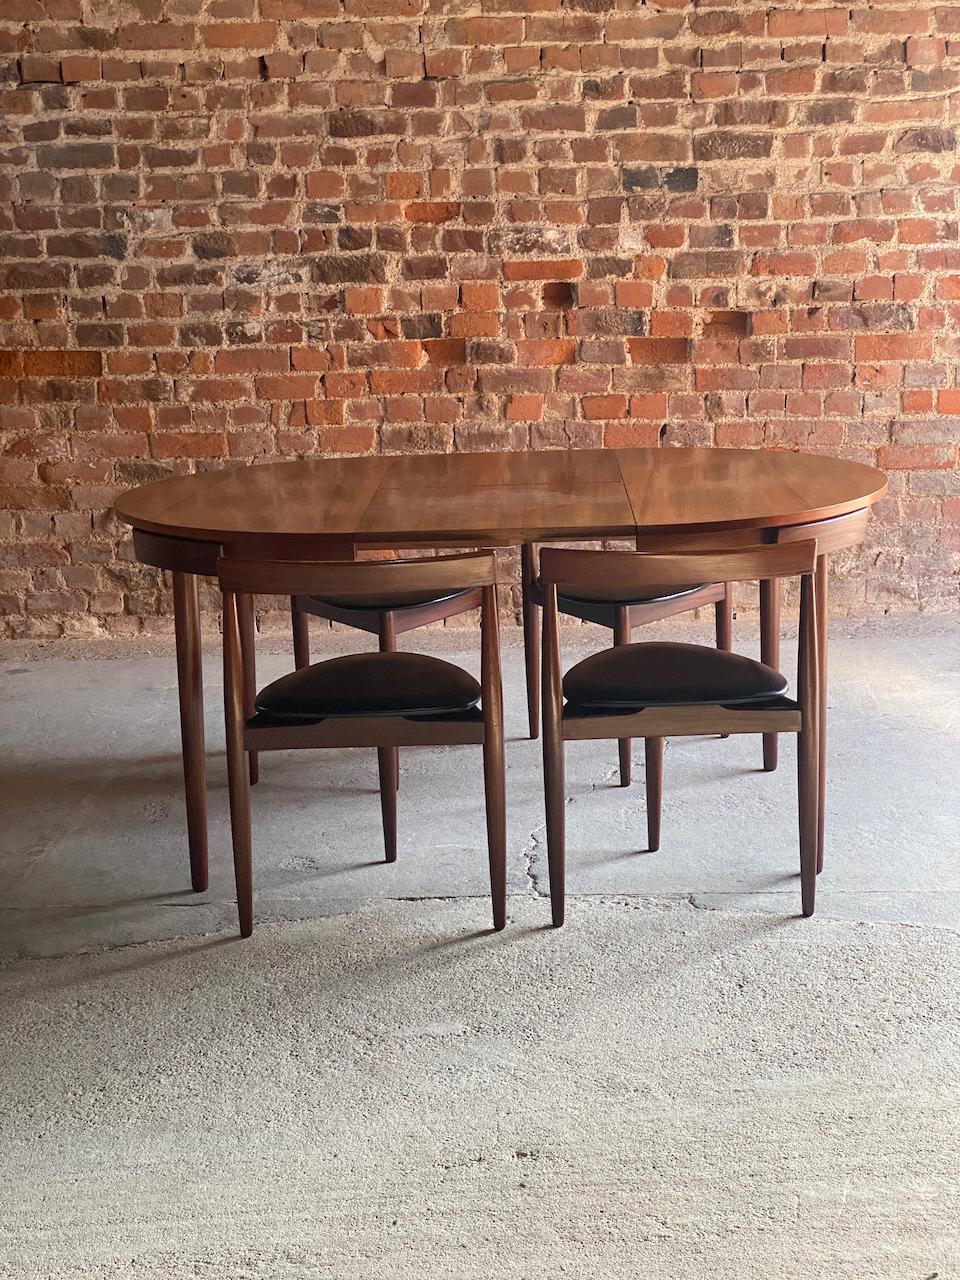 Hans Olsen Dinette dining table and four chairs Frem Rojle Circa 1960

Magnificent mid century Danish Hans Olsen designed 'Dinette' extending dining table manufactured by Frem Rojle Denmark circa 1960. The table is made from solid teak and